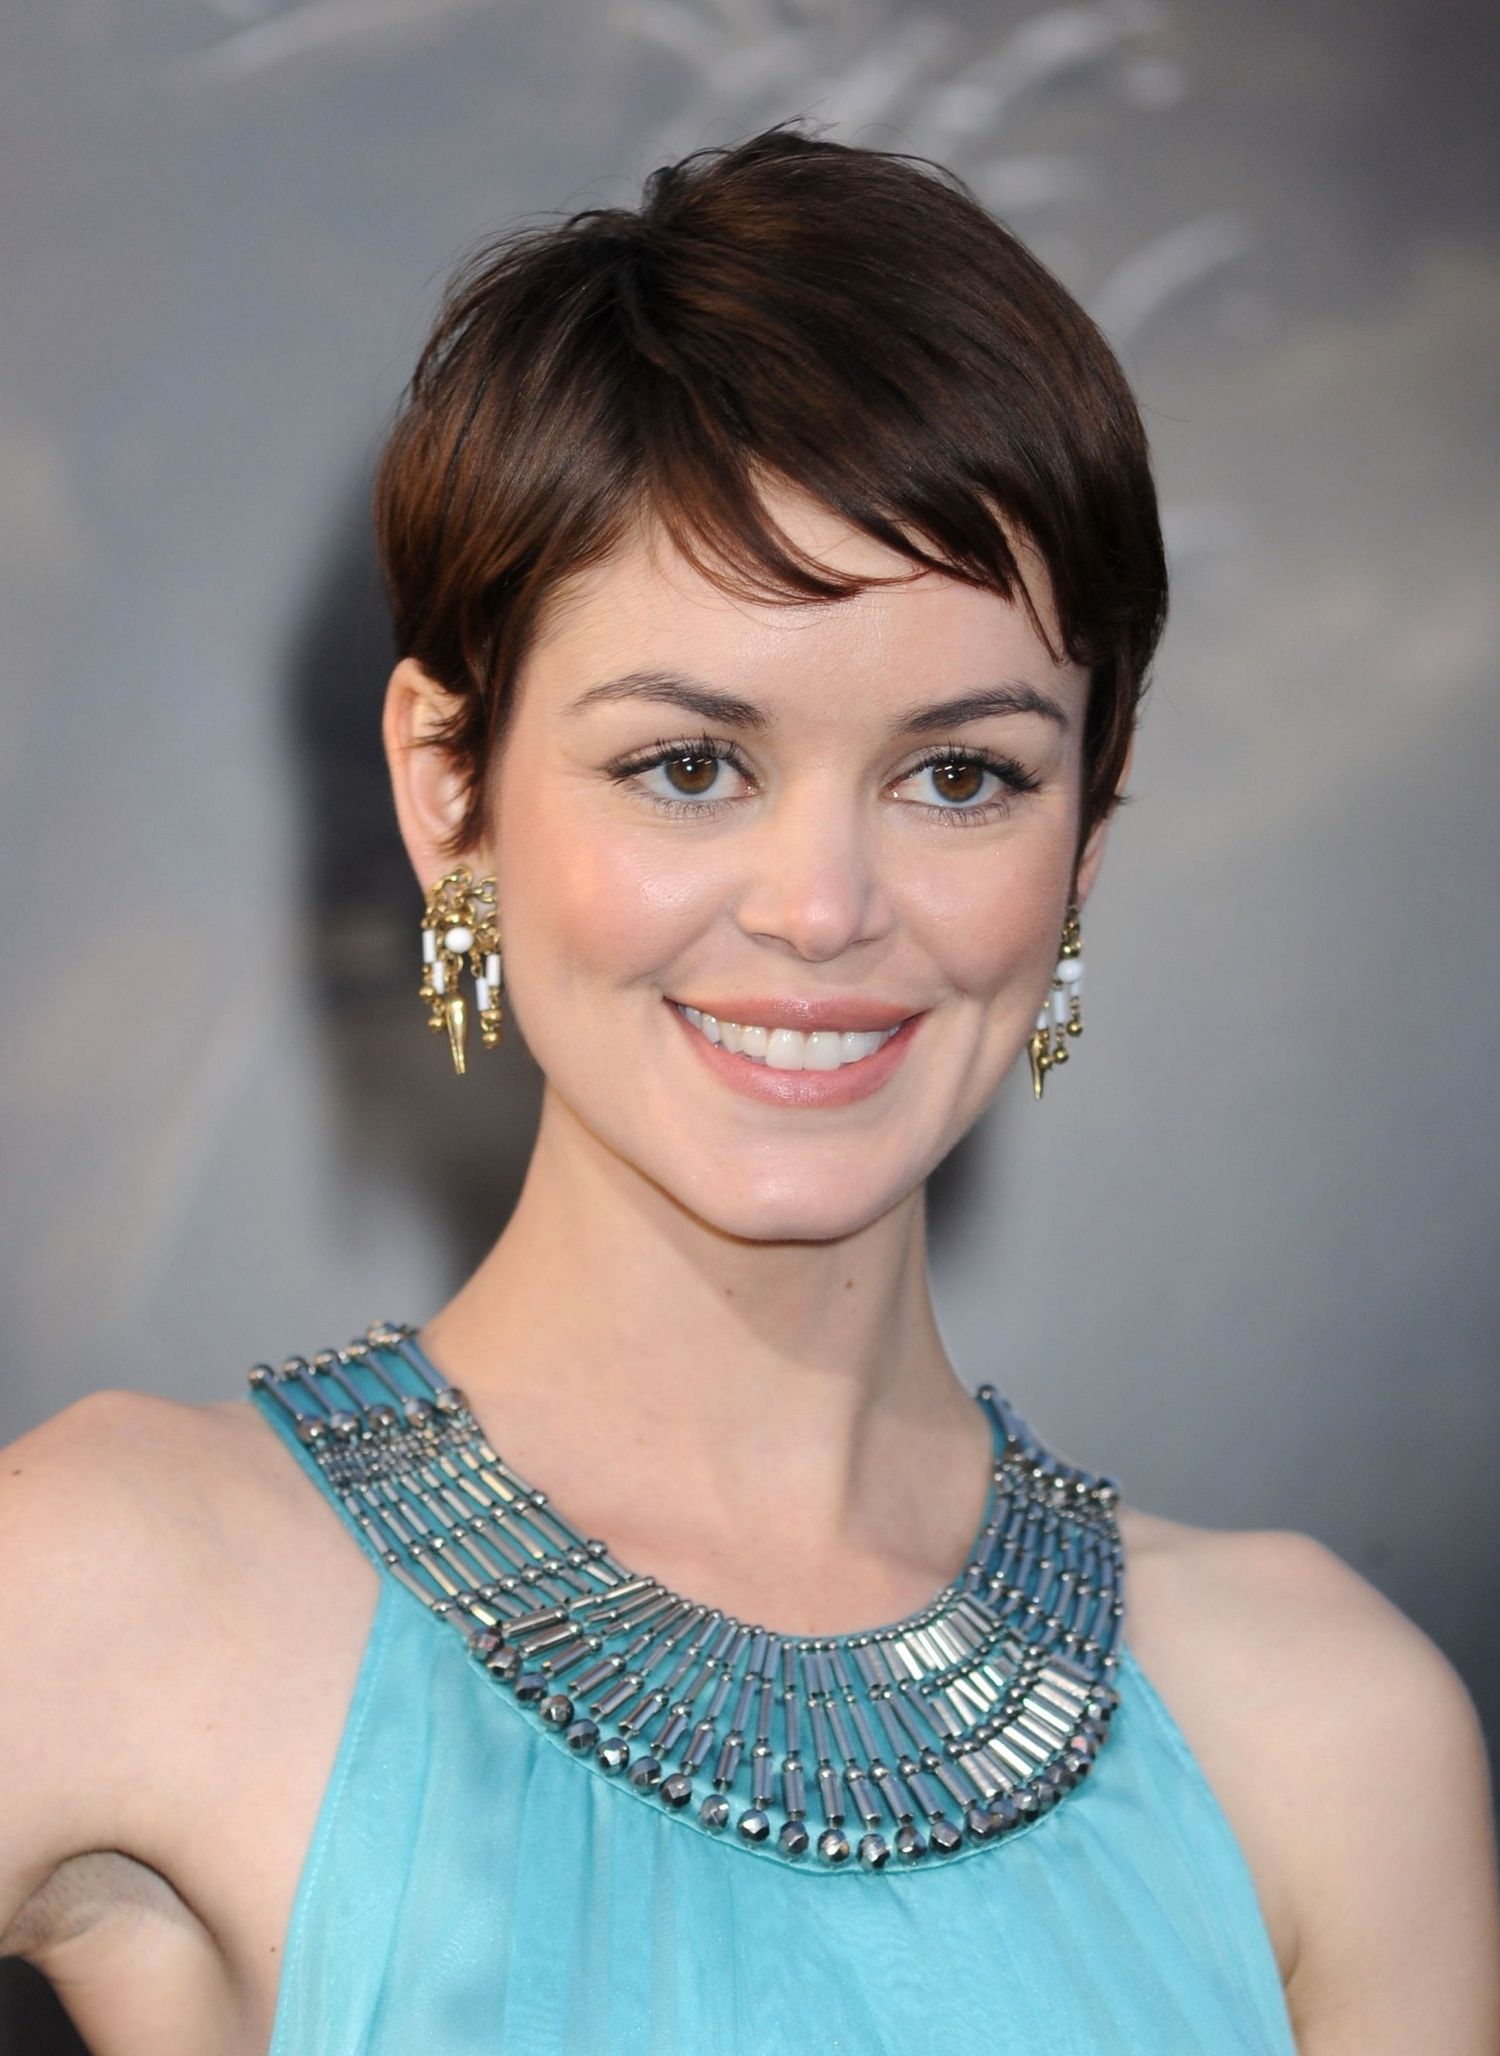 19 Cute Celebrity Haircuts To Consider | Glamour Pertaining To Most Recently Famous Pixie Hairstyles (Photo 13 of 15)